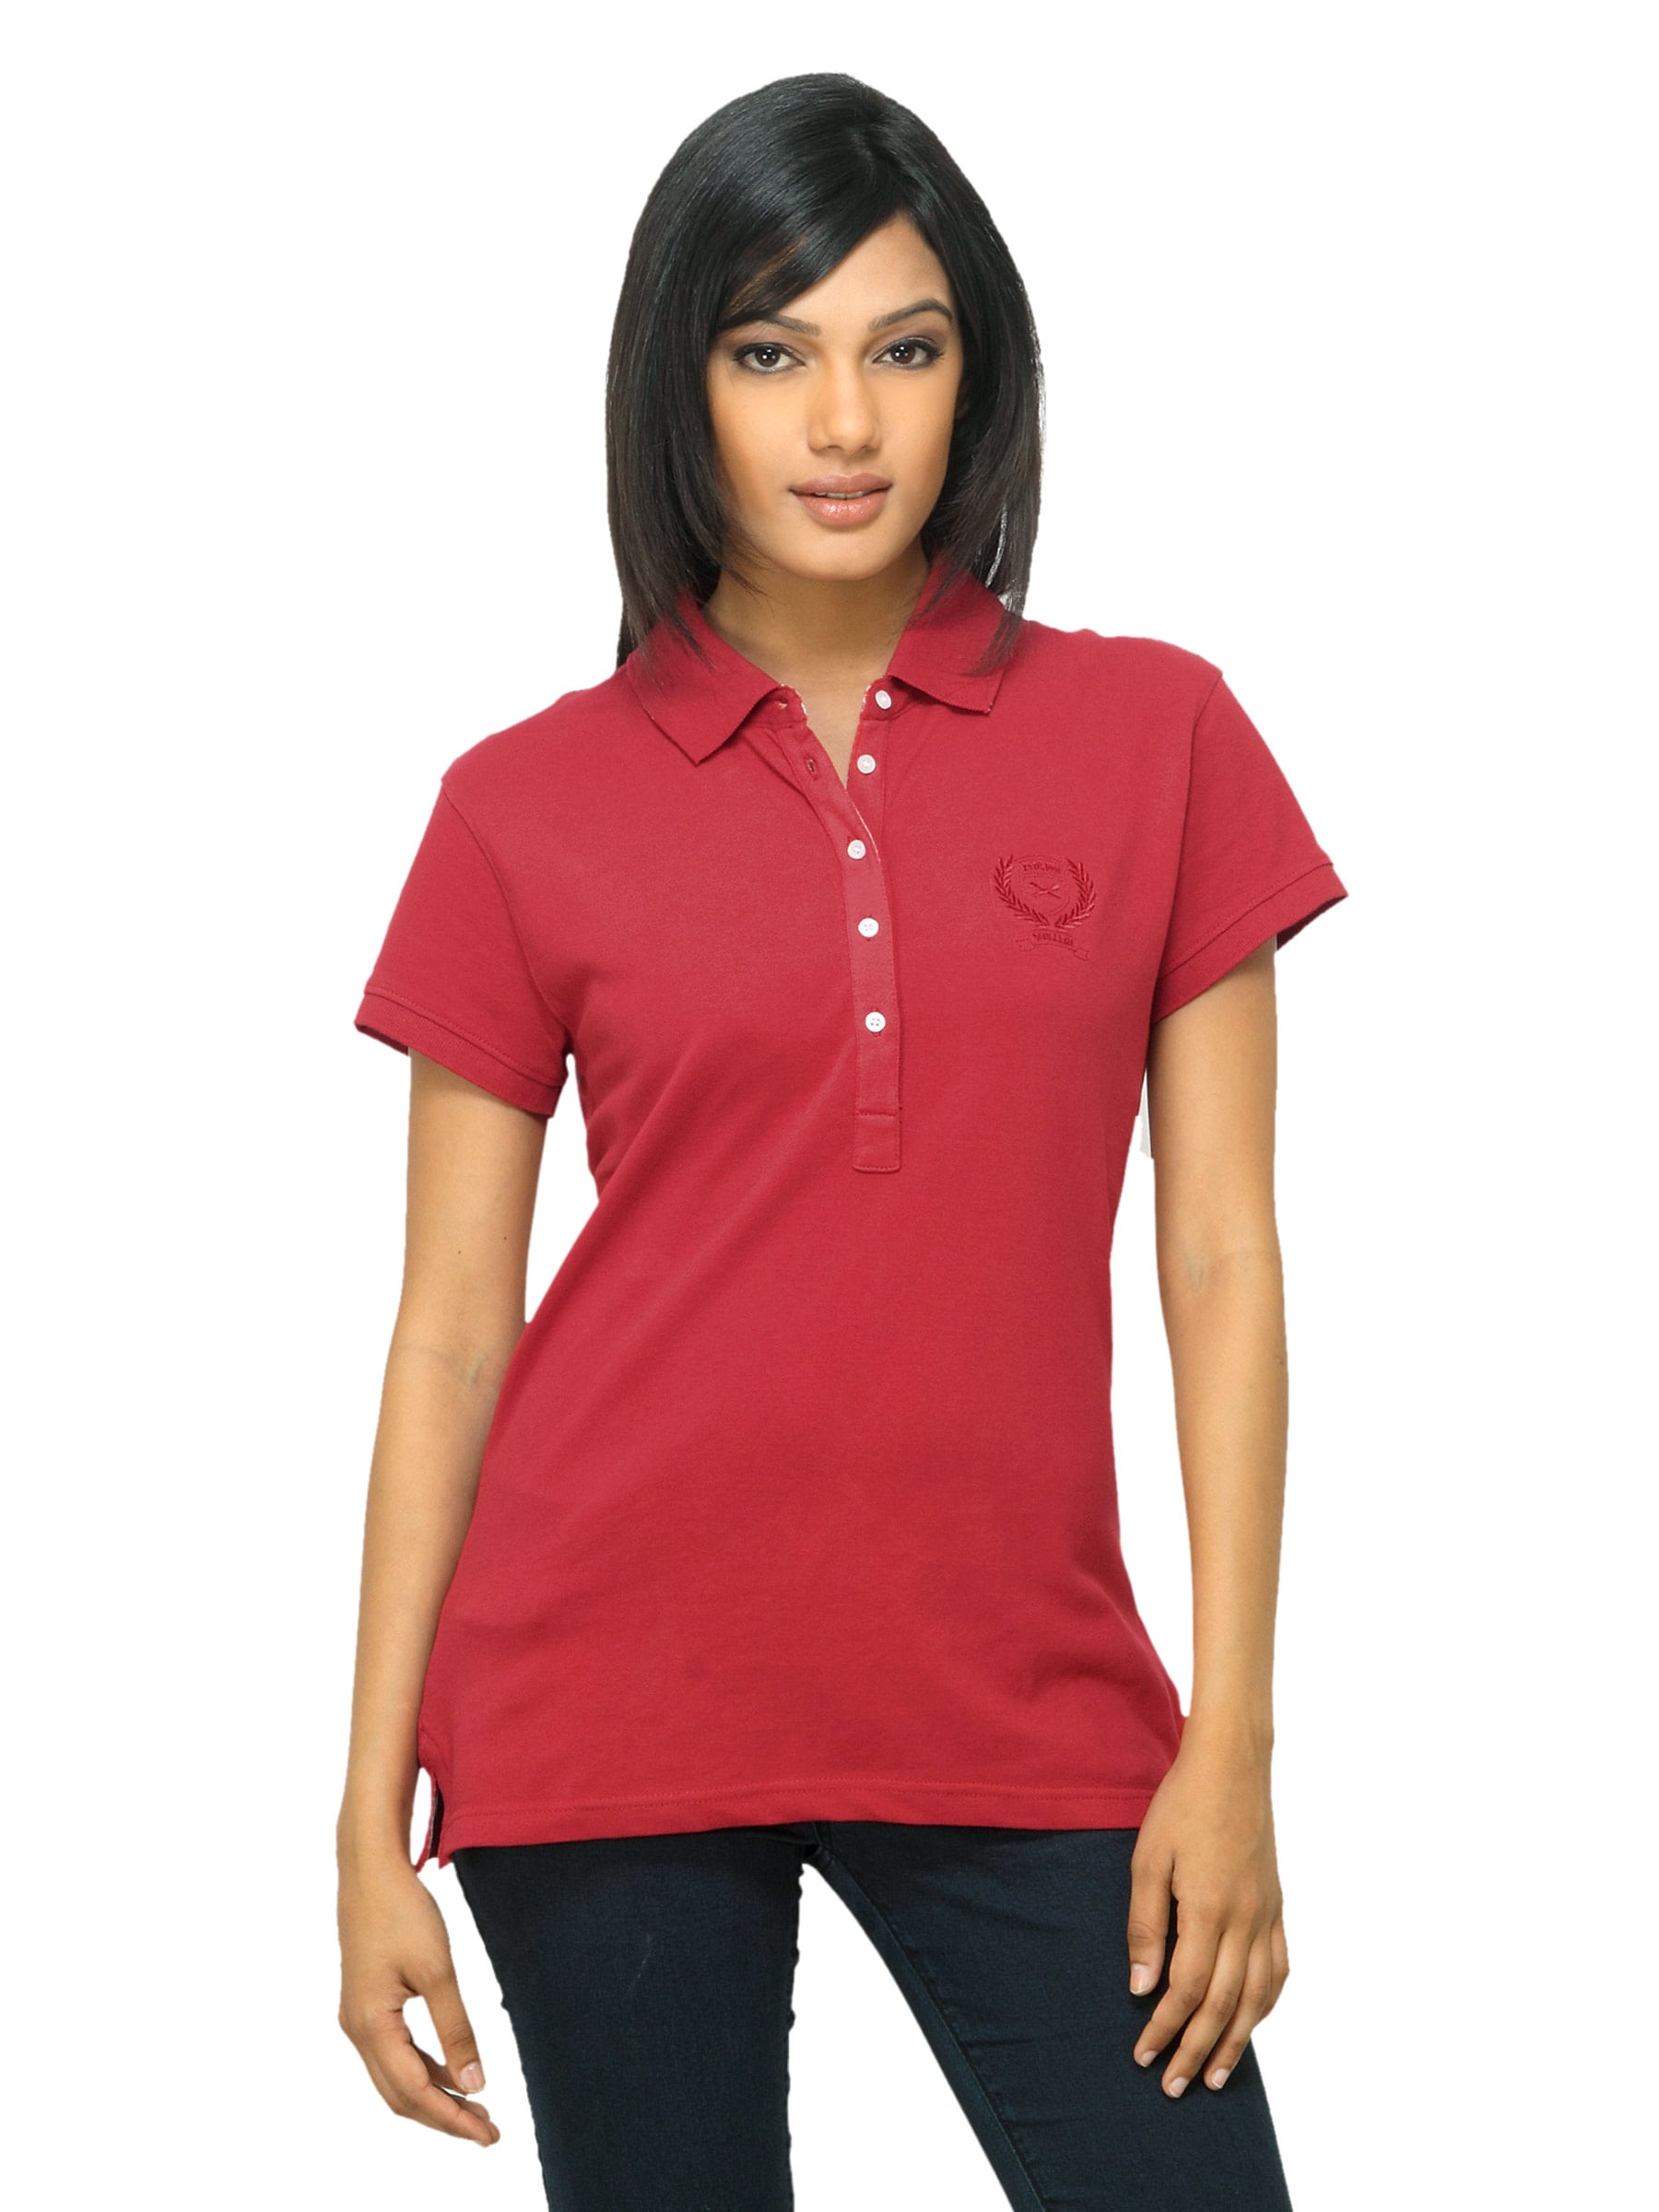 Scullers For Her Red Polo T-shirt